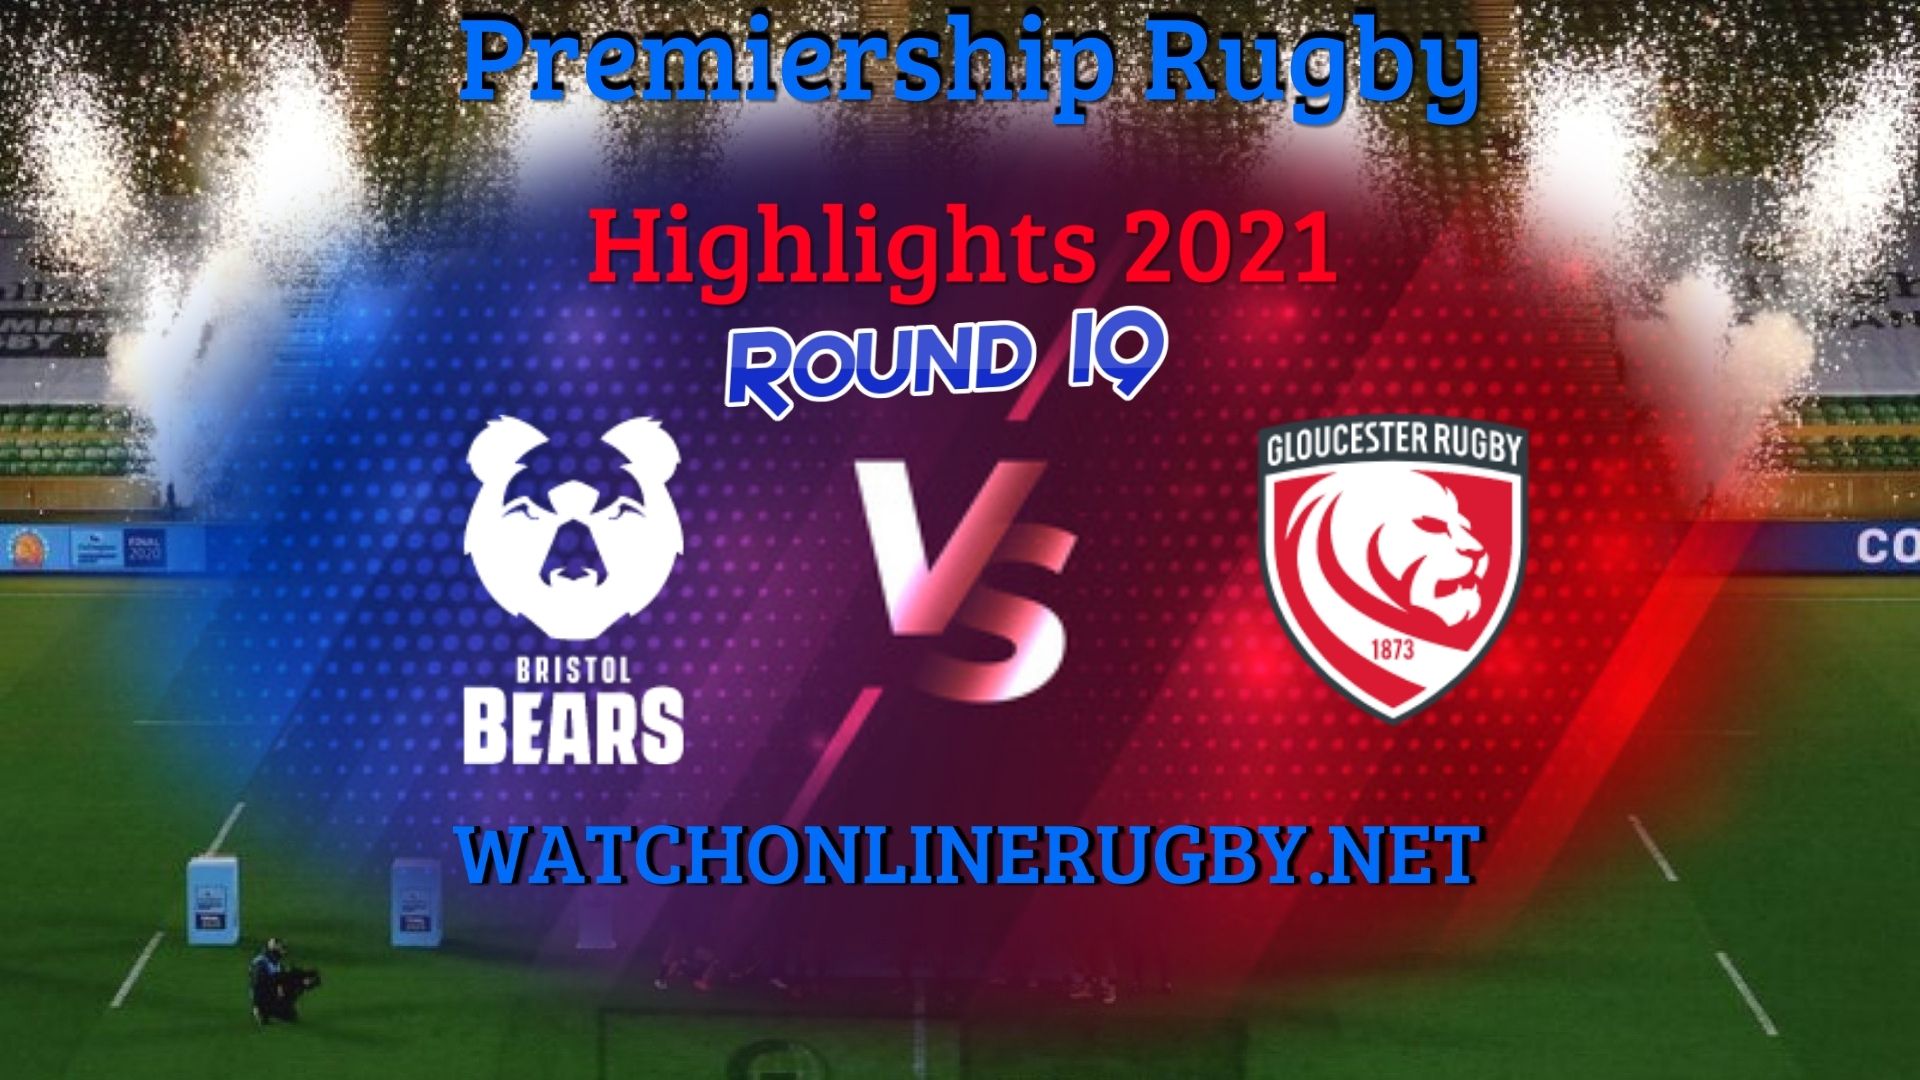 Bristol Bears Vs Gloucester Rugby Premiership Rugby 2021 RD 19